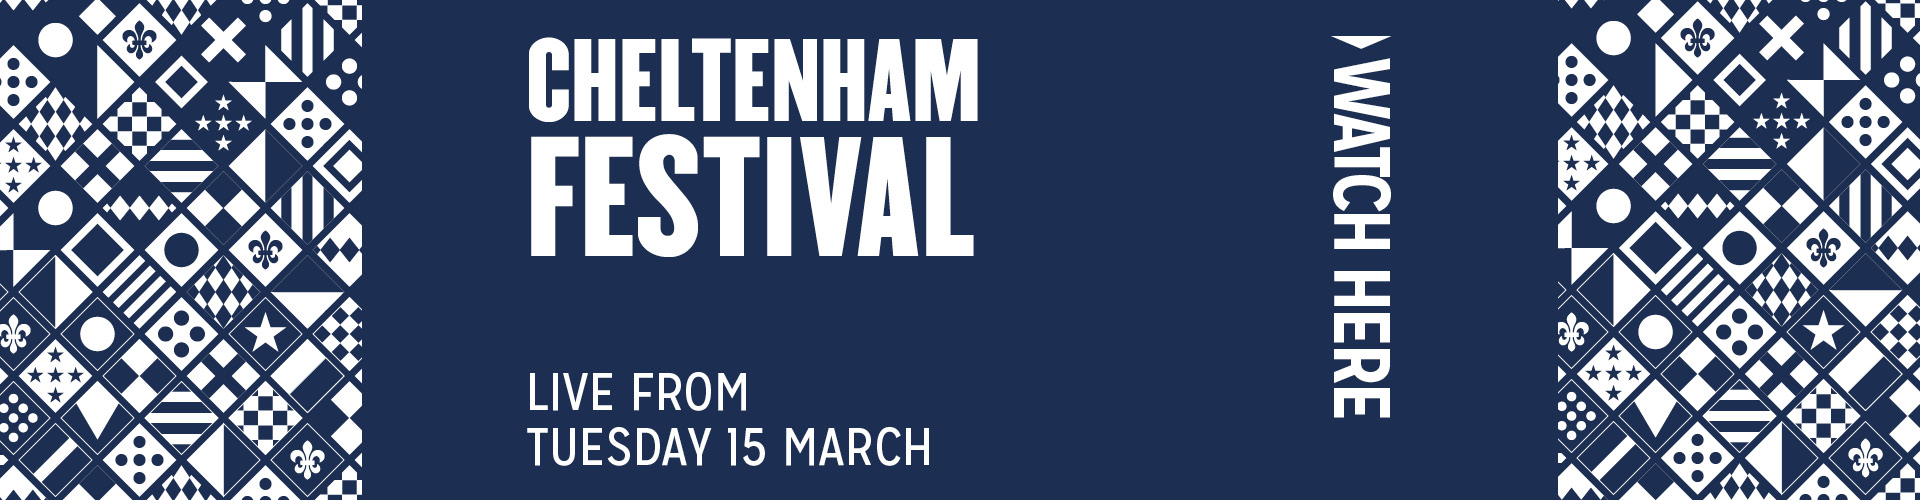 Cheltenham Festival, Live Here from Tuesday 15th March